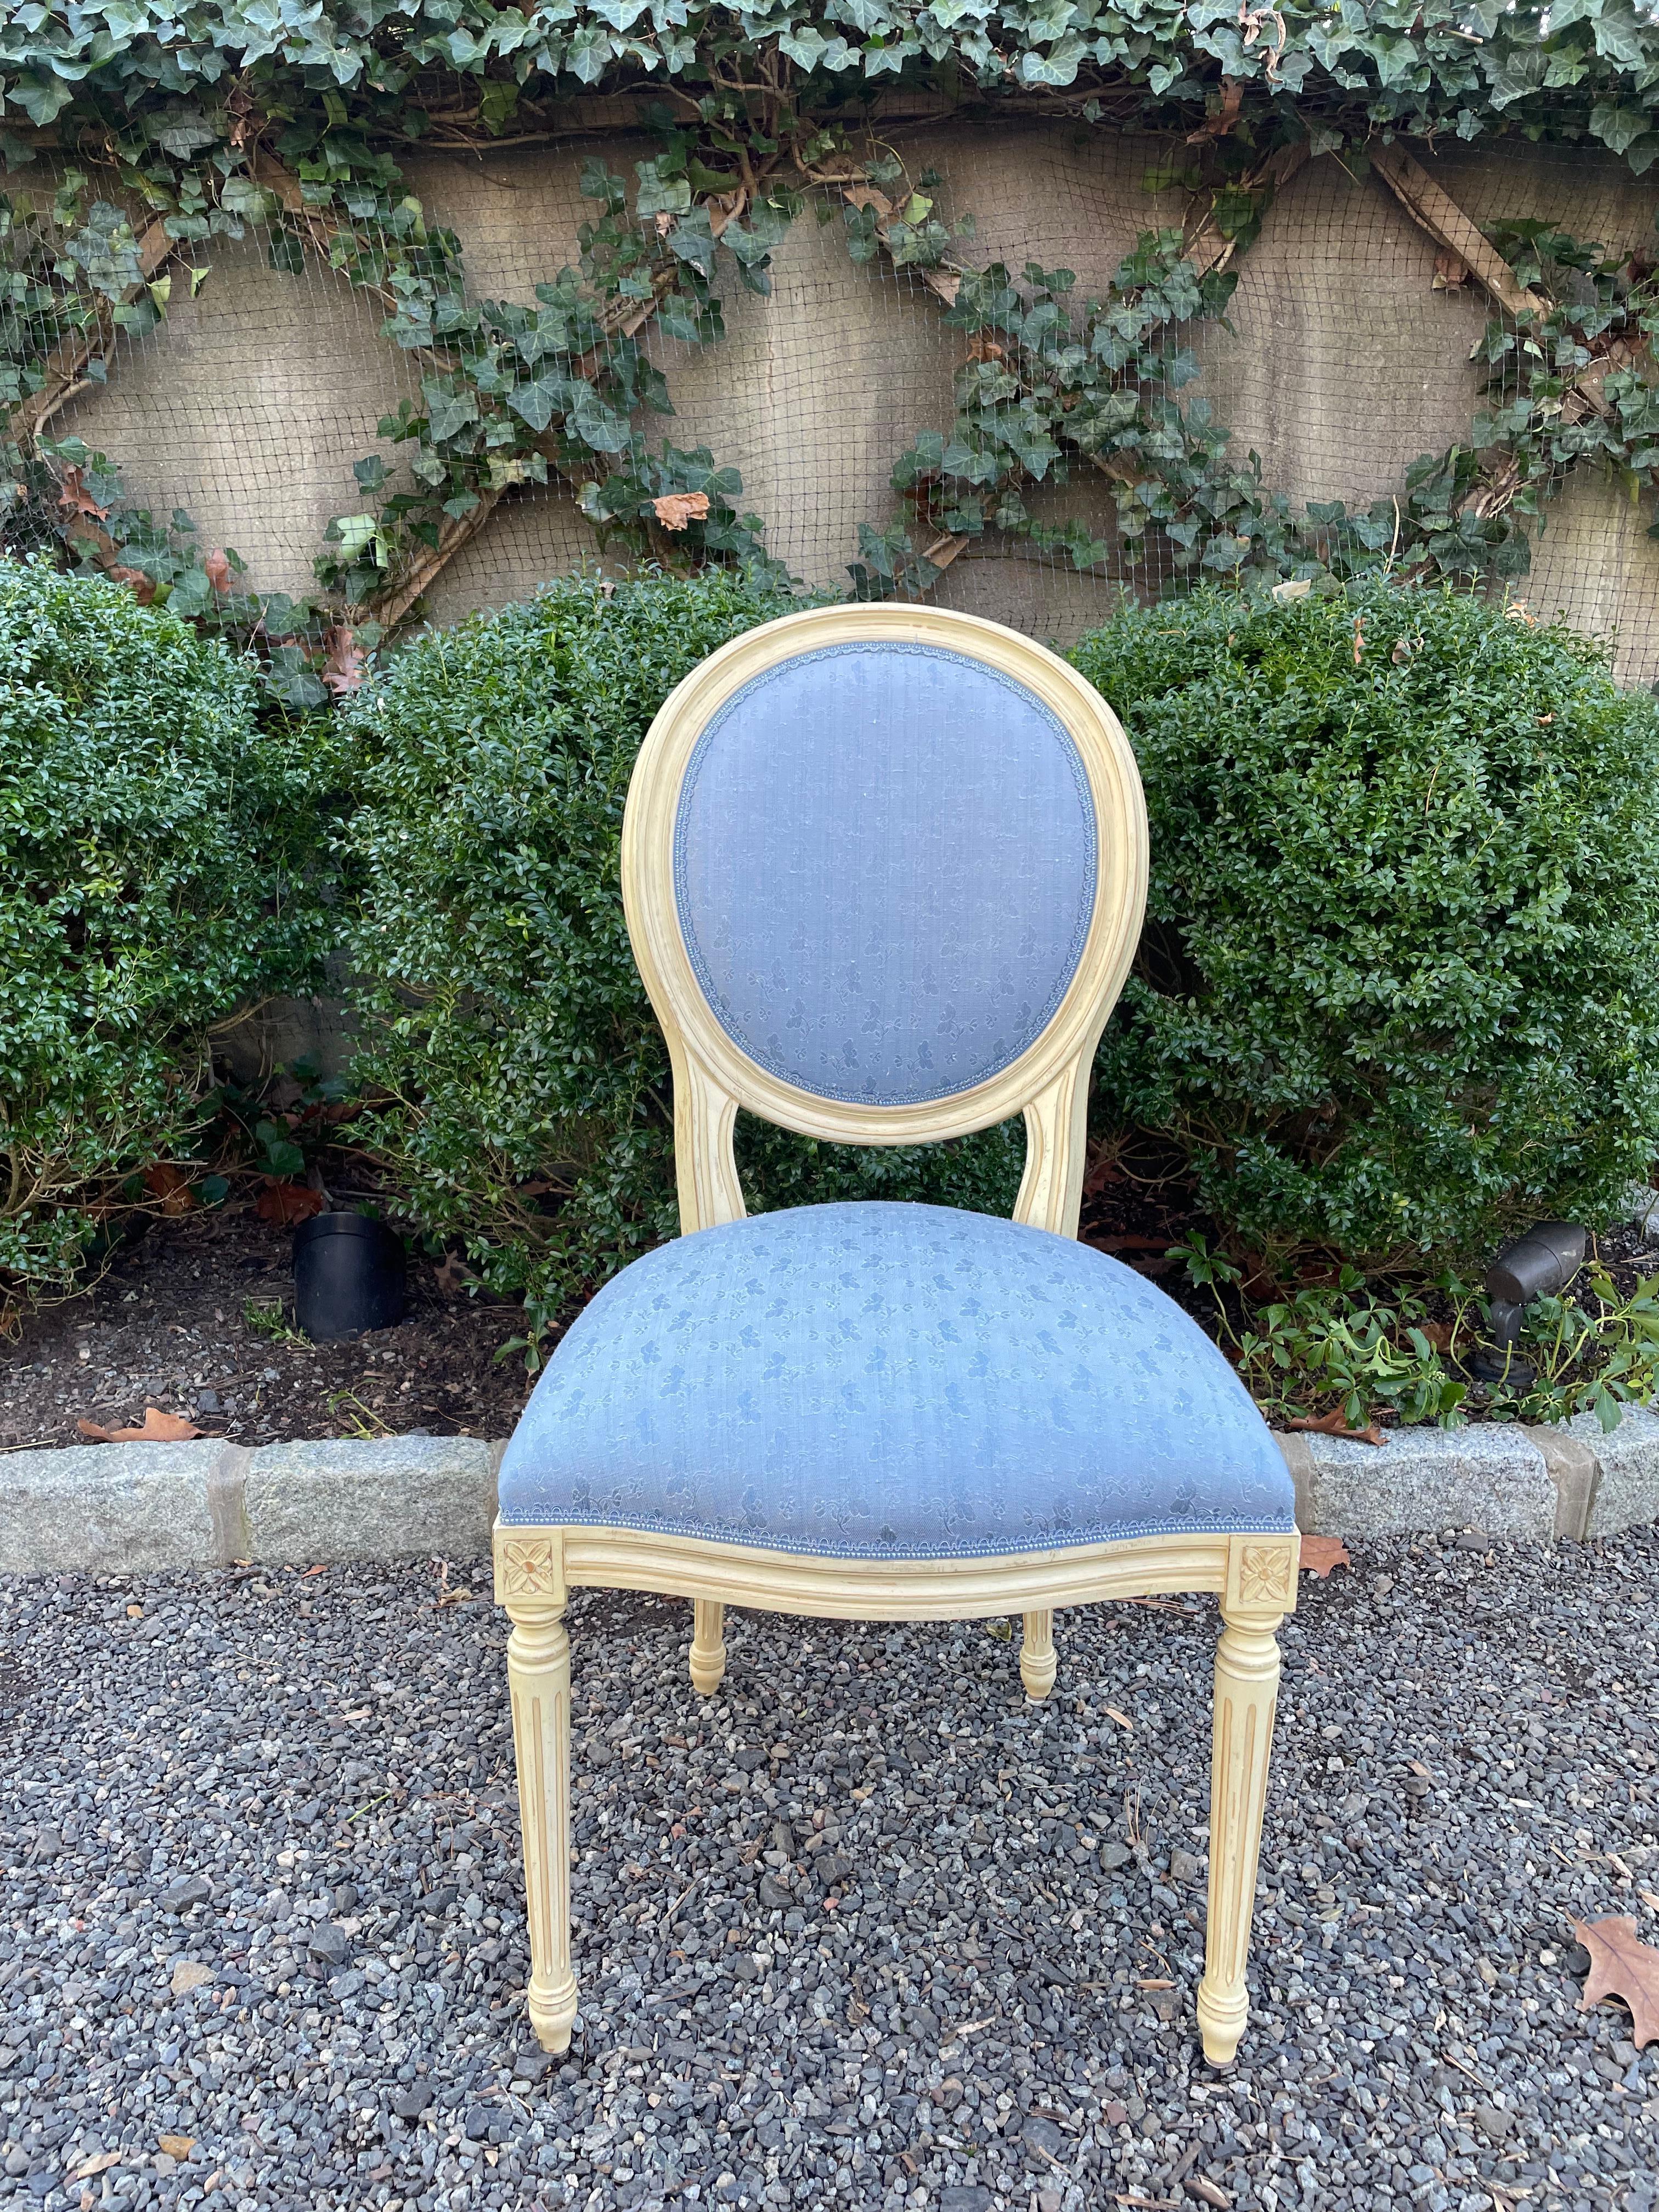 Lovely vintage set of eight Louis XVI style dining chairs painted in an off white. The set consists of five rectangular backs and three oval backs, each upholstered in a blue brocade. The backs of each chair are upholstered in a blue and white check